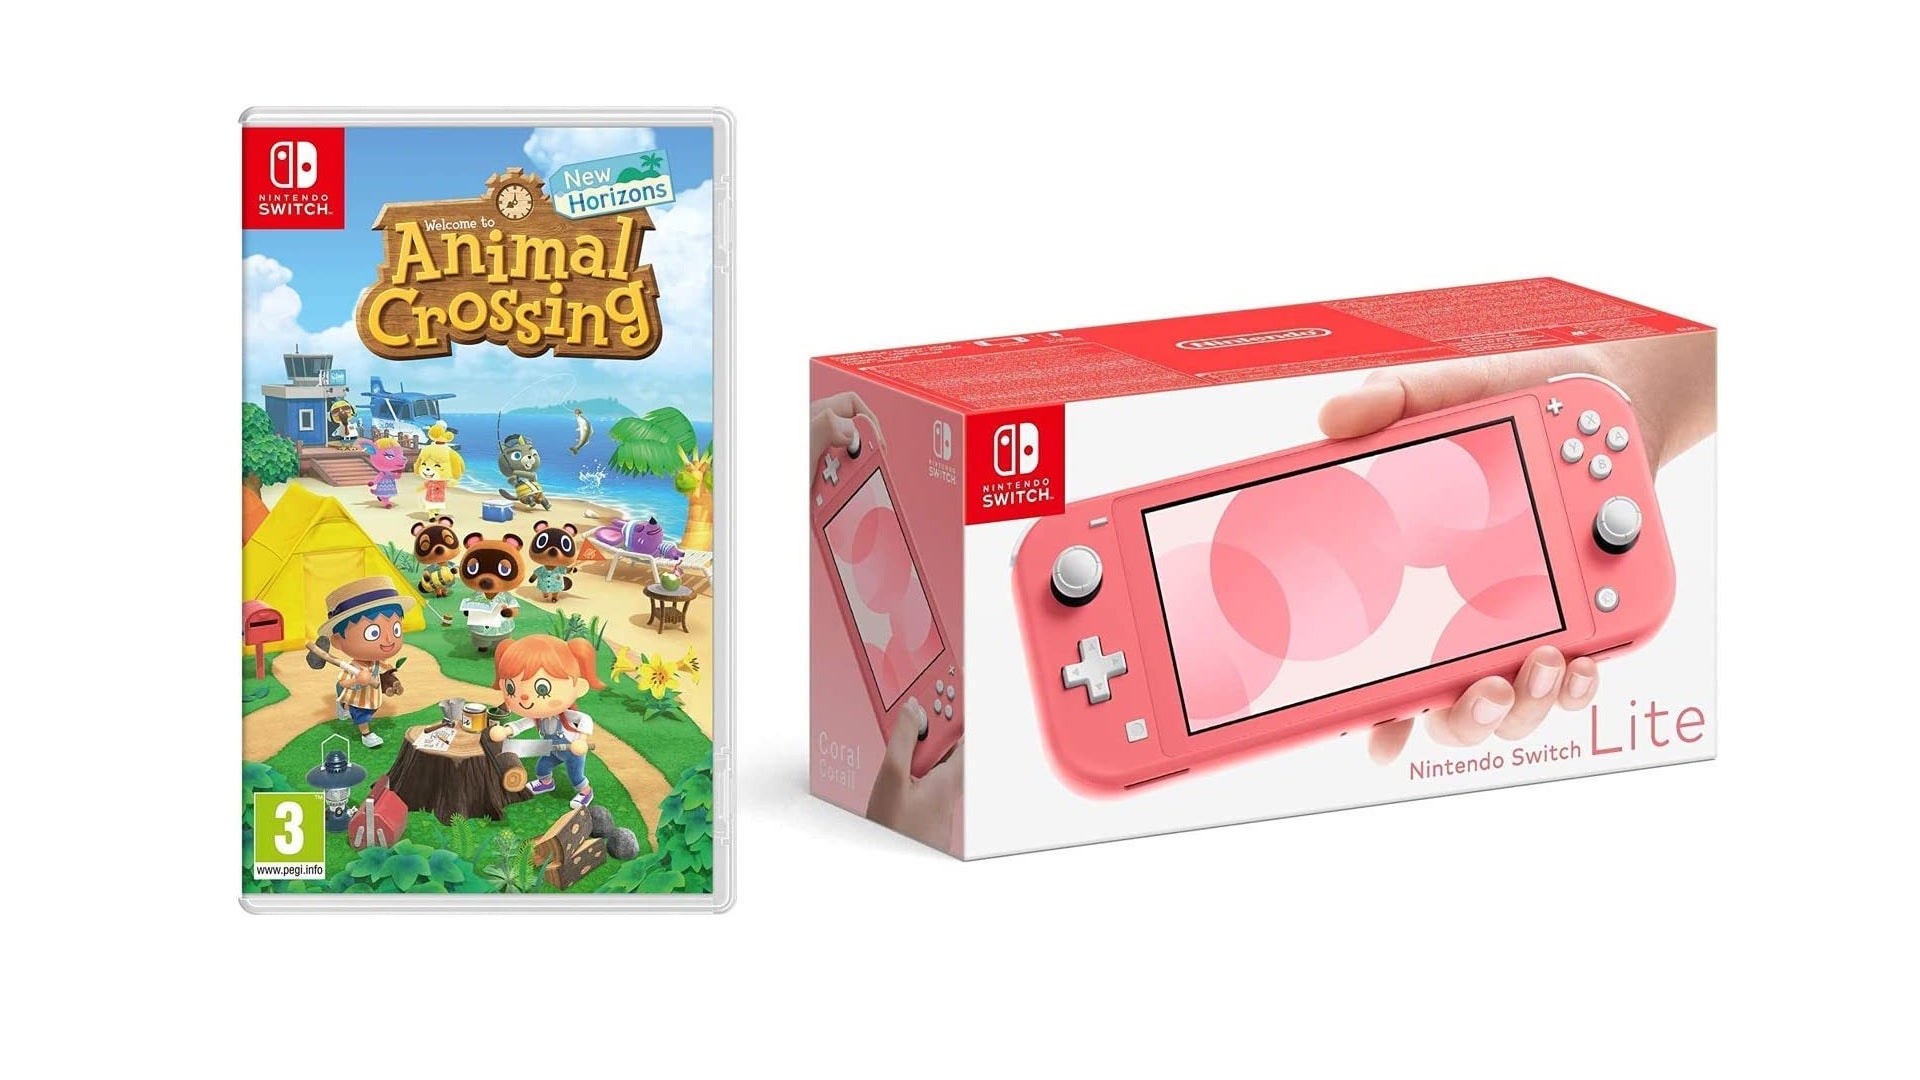 Animal Crossing and Switch Lite bundle